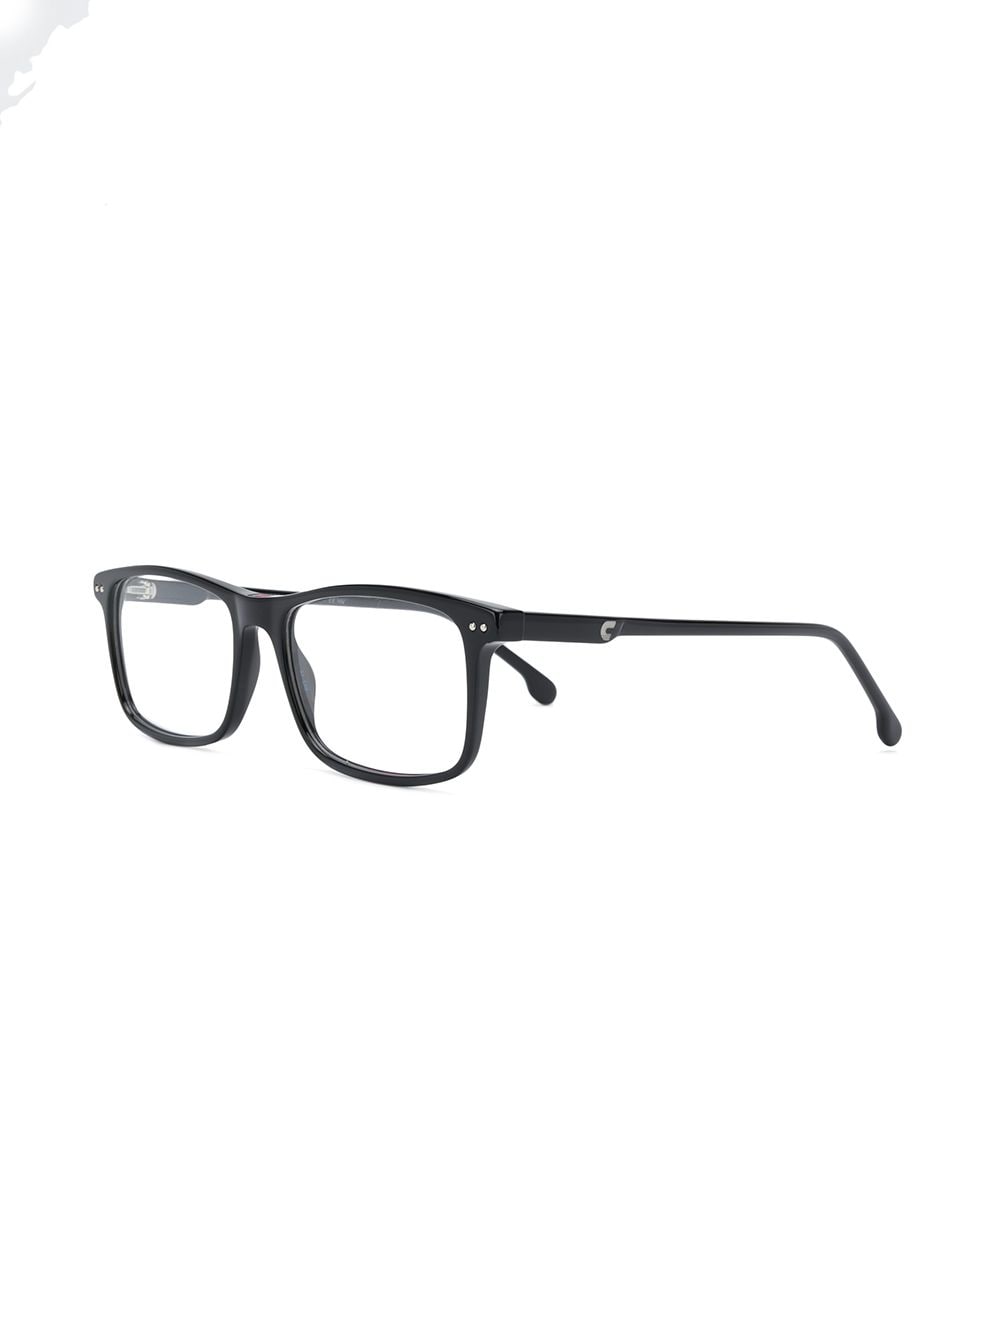 Shop Carrera rectangular shaped glasses with Express Delivery - FARFETCH